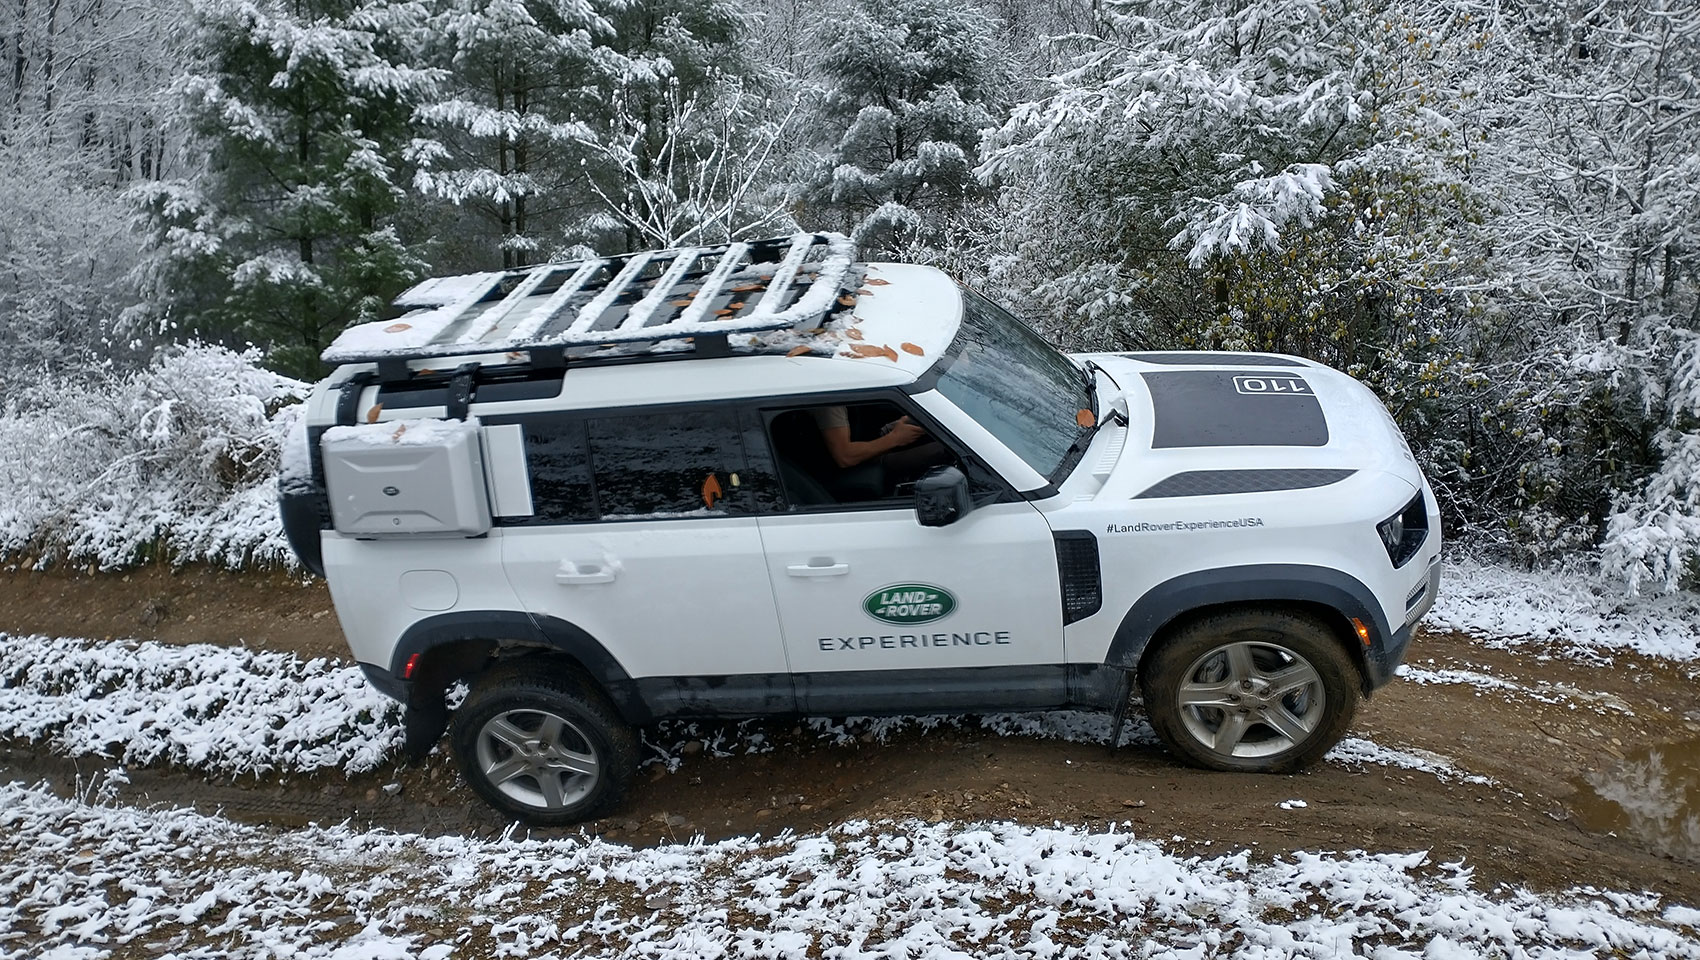 White Land Rover Defender 110 navigating a snowy, muddy trail